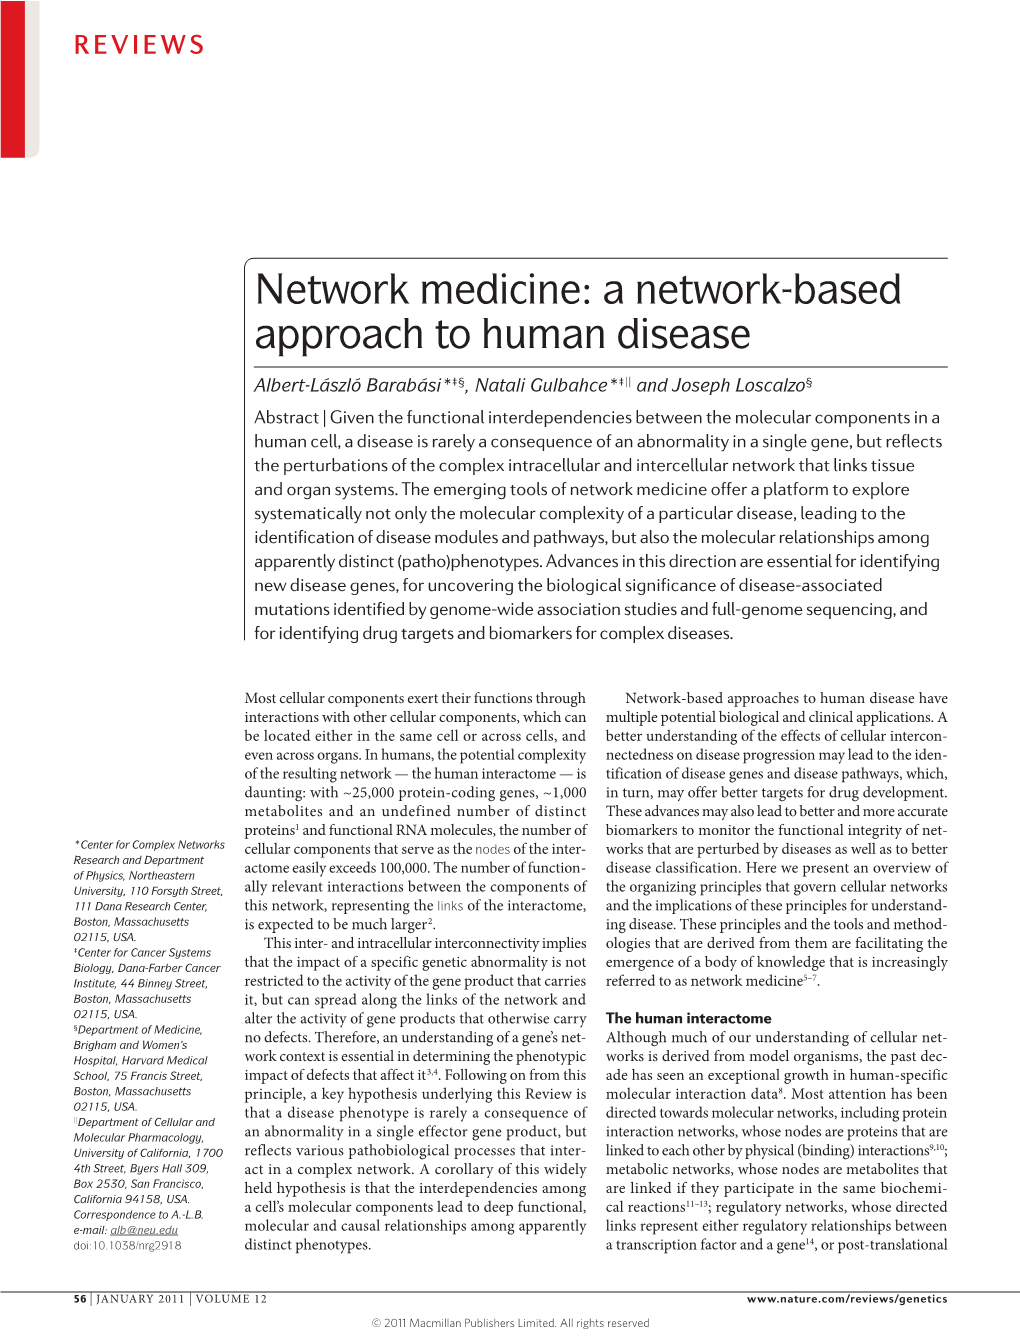 Network Medicine: a Network-Based Approach to Human Disease